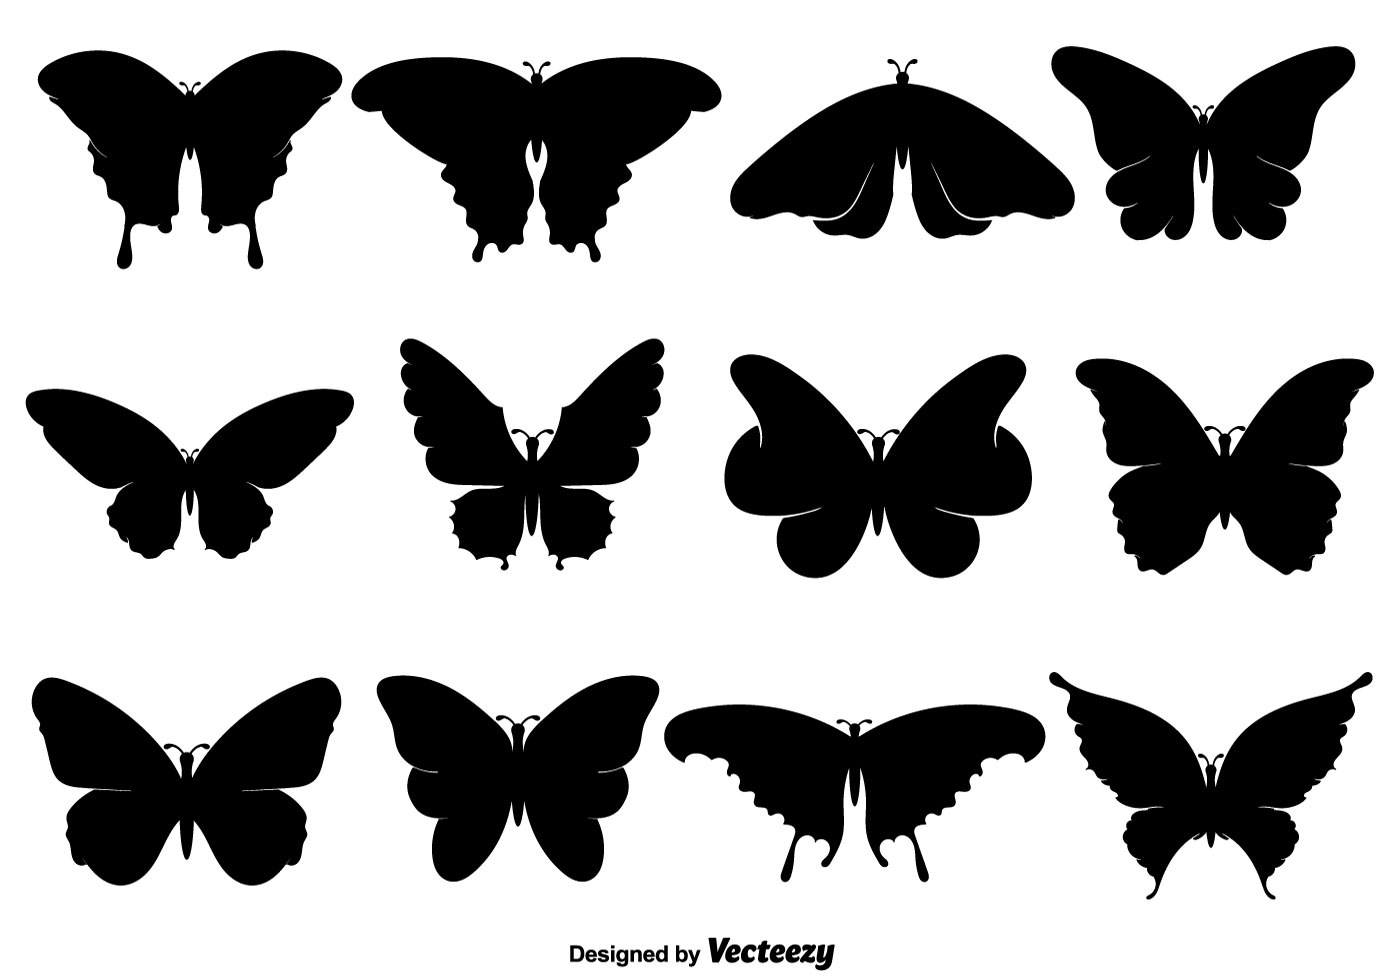 black butterfly icons or silhouettes set vector